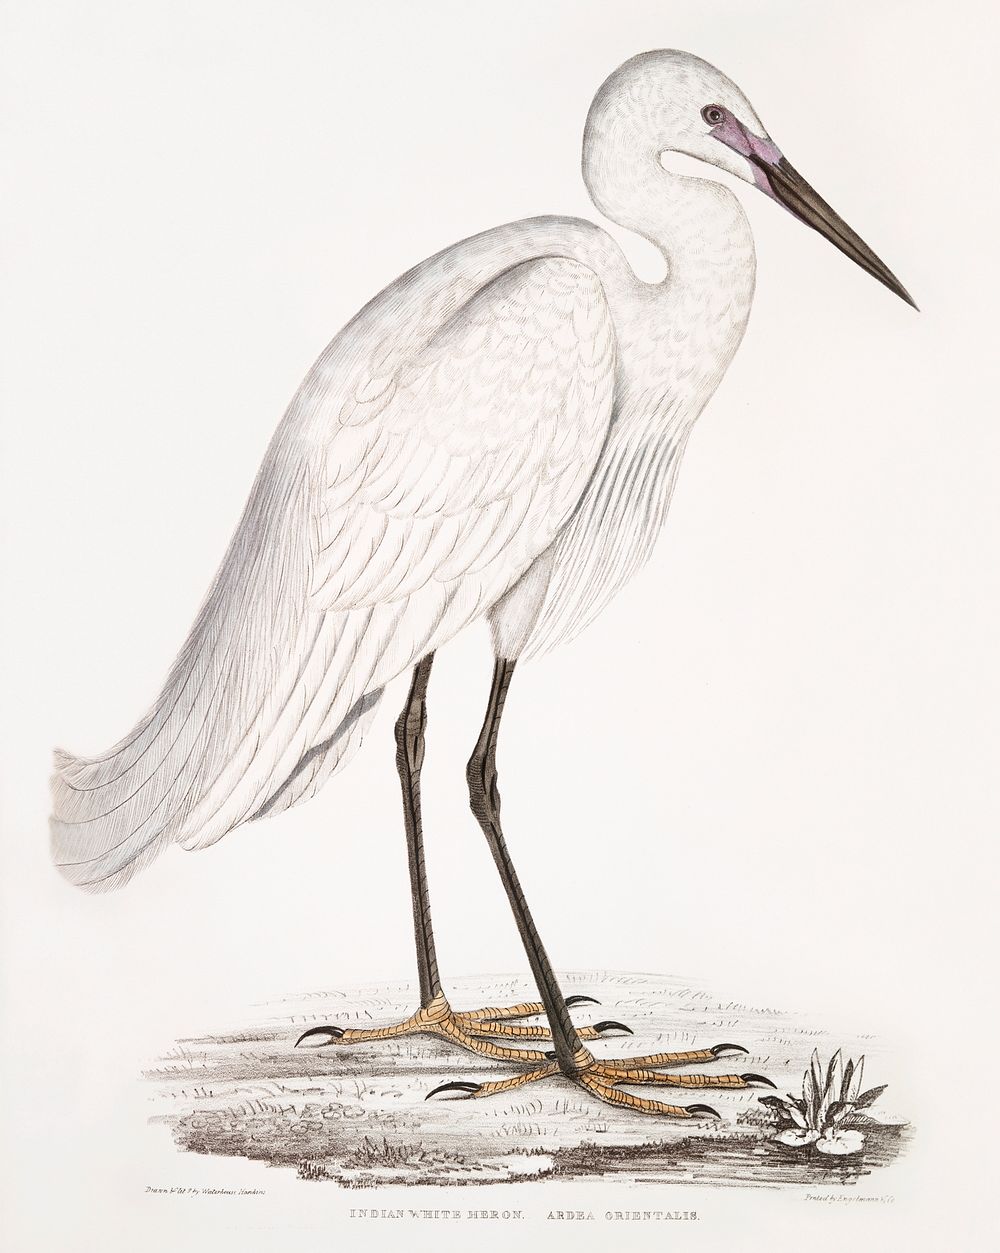 Indian white Heron (Ardea orientalis) from Illustrations of Indian zoology (1830-1834) by John Edward Gray (1800-1875).…